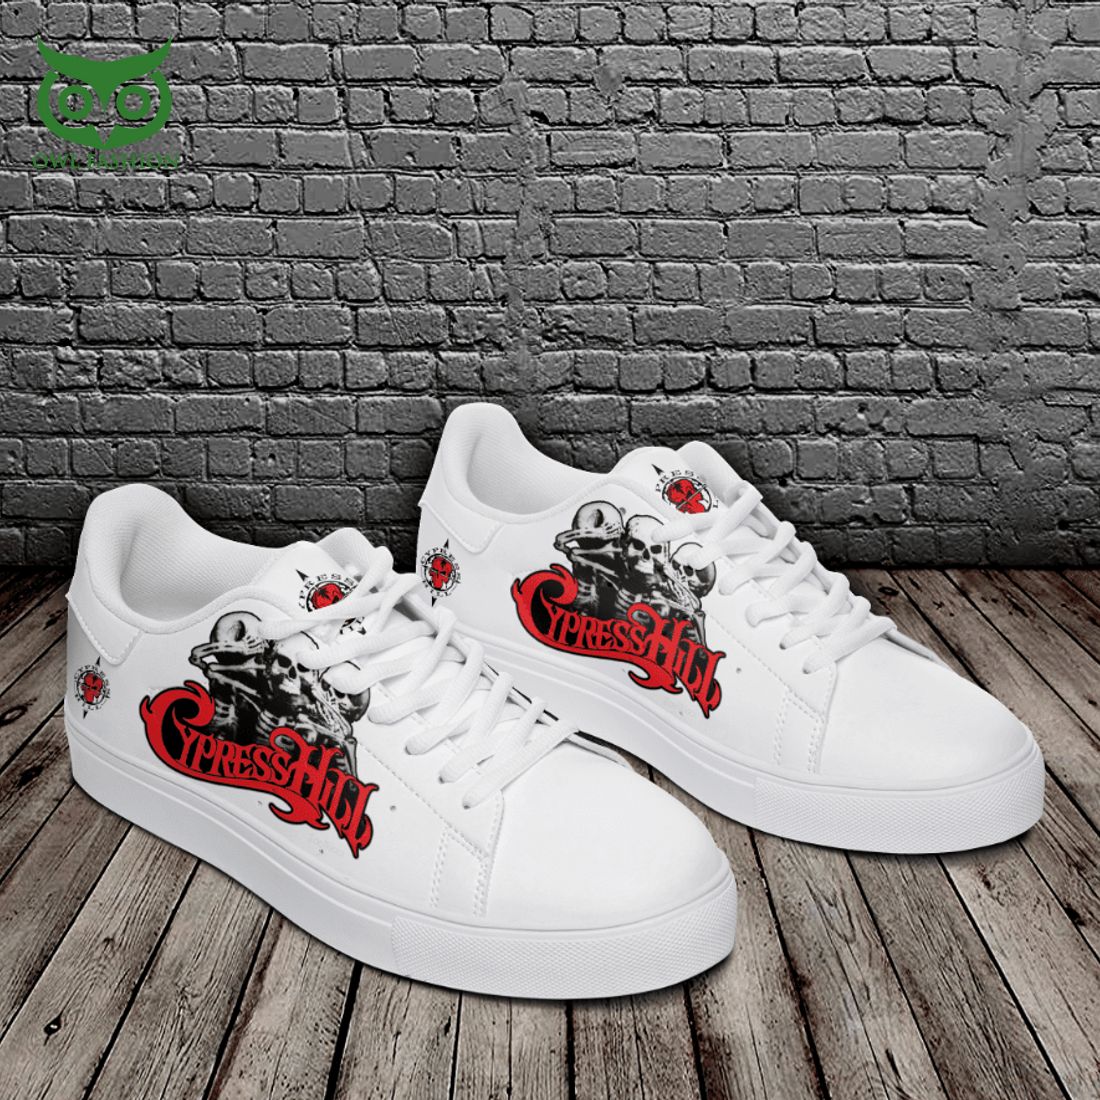 cypress hill skull red 3d printed stan smith shoes 2 0AHkw